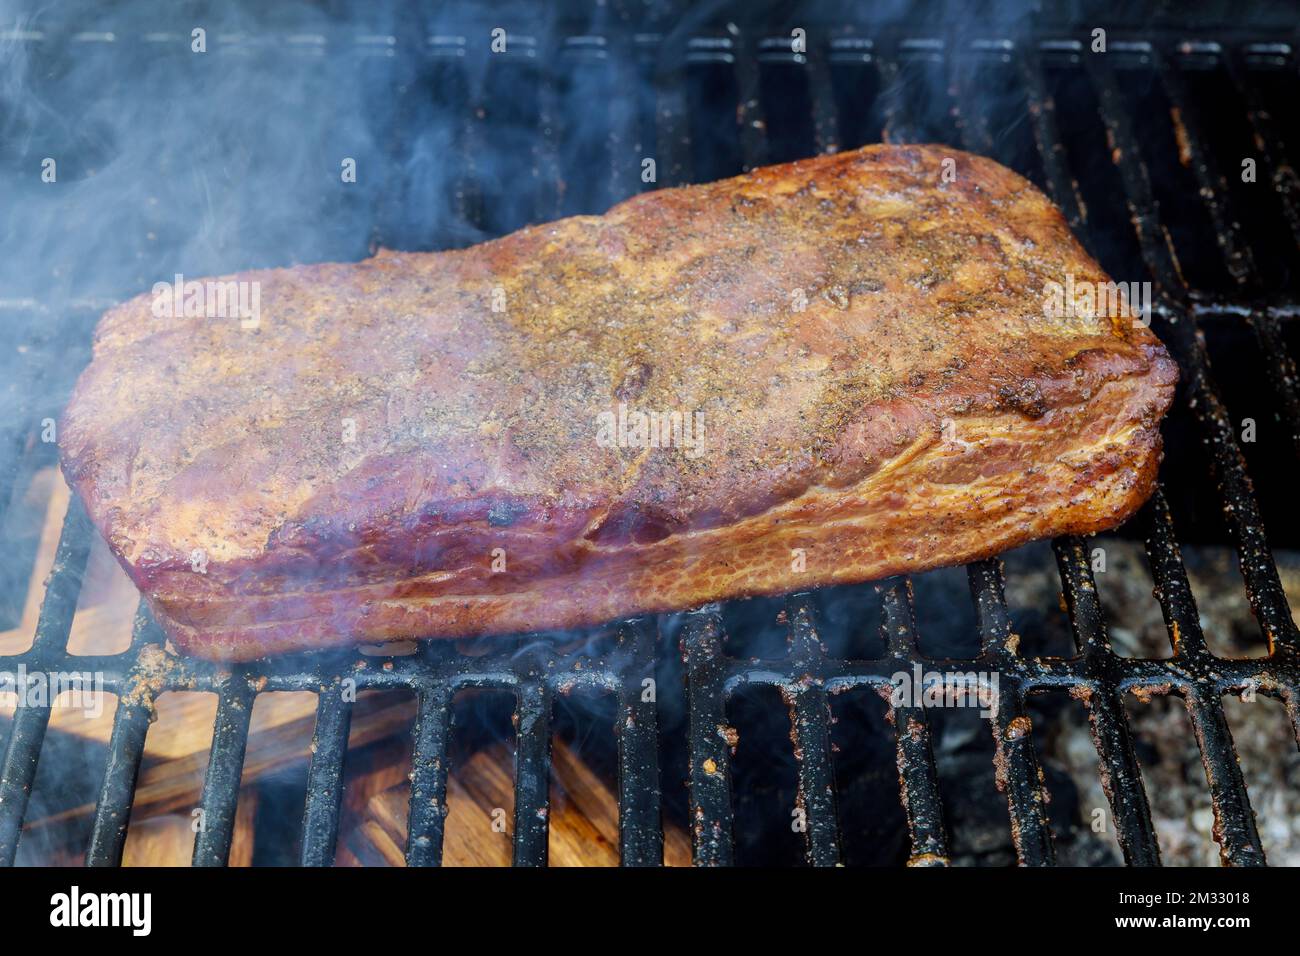 Traditional method of roasting smoked whole bacon on BBQ grill using homemade ingredients Stock Photo